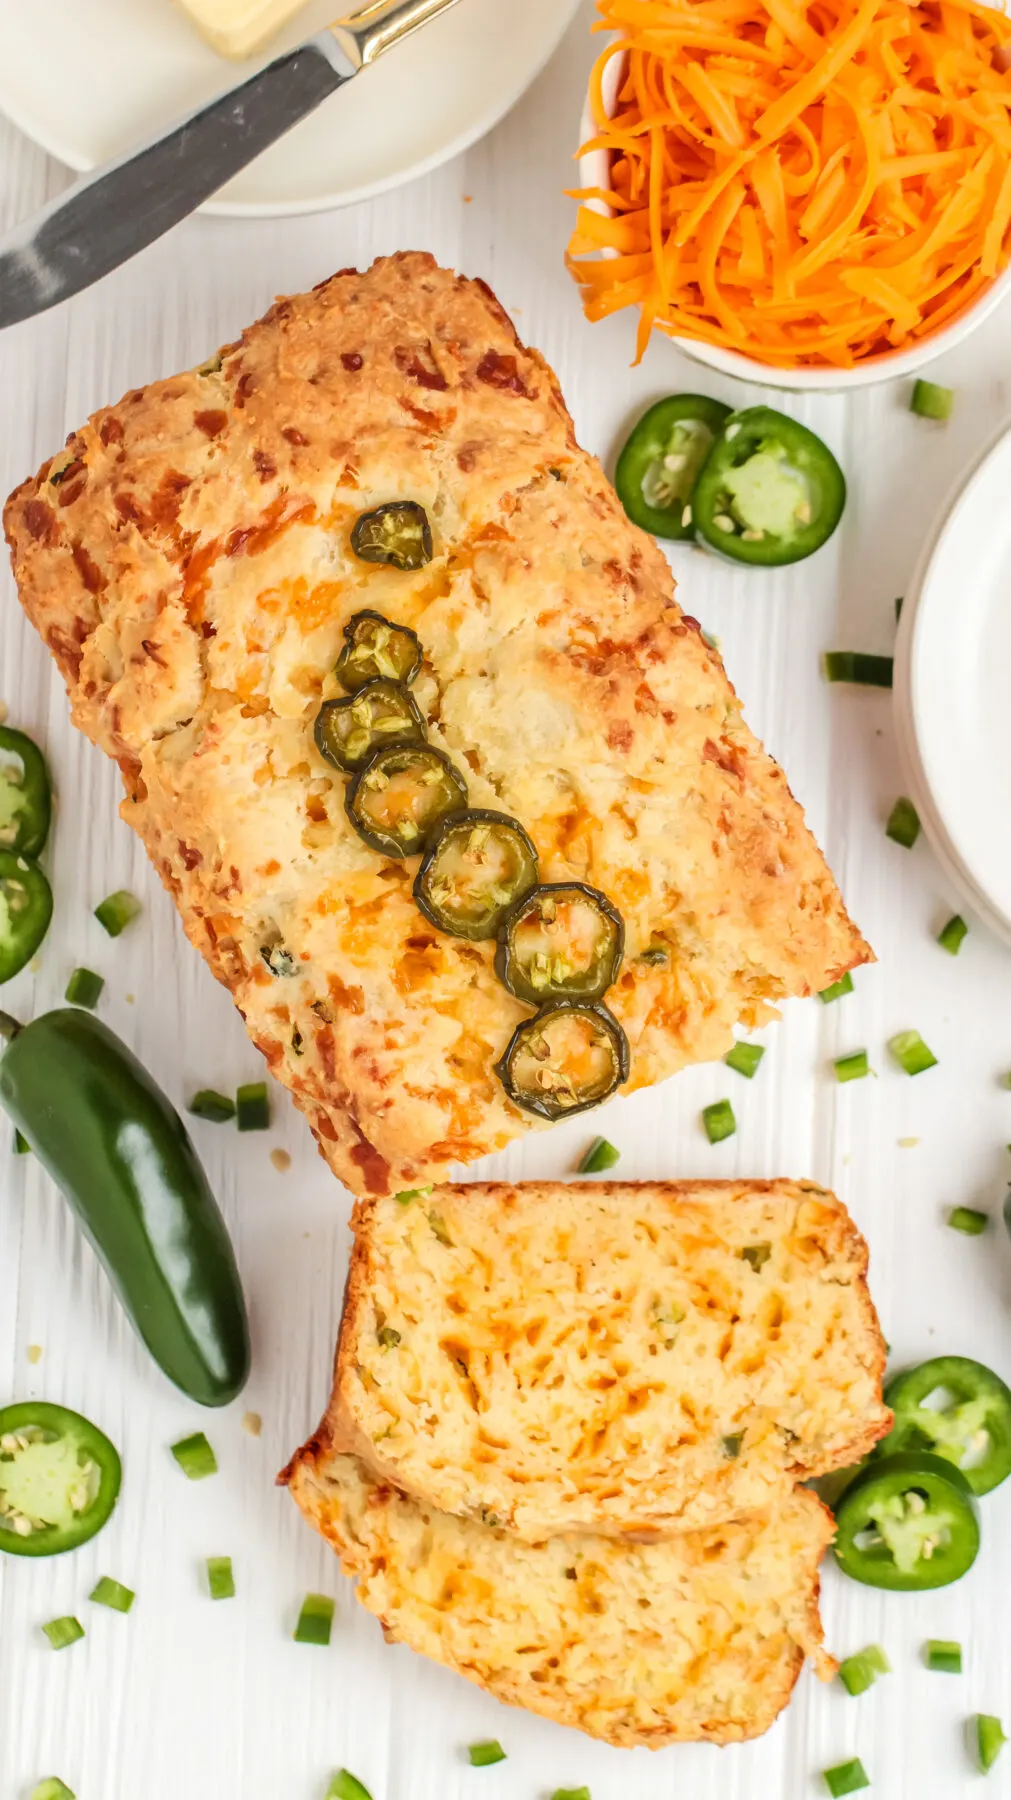 This easy jalapeño cheddar bread recipe is loaded with spice & cheese. It's a great savoury quick bread with a moist, tender crumb.